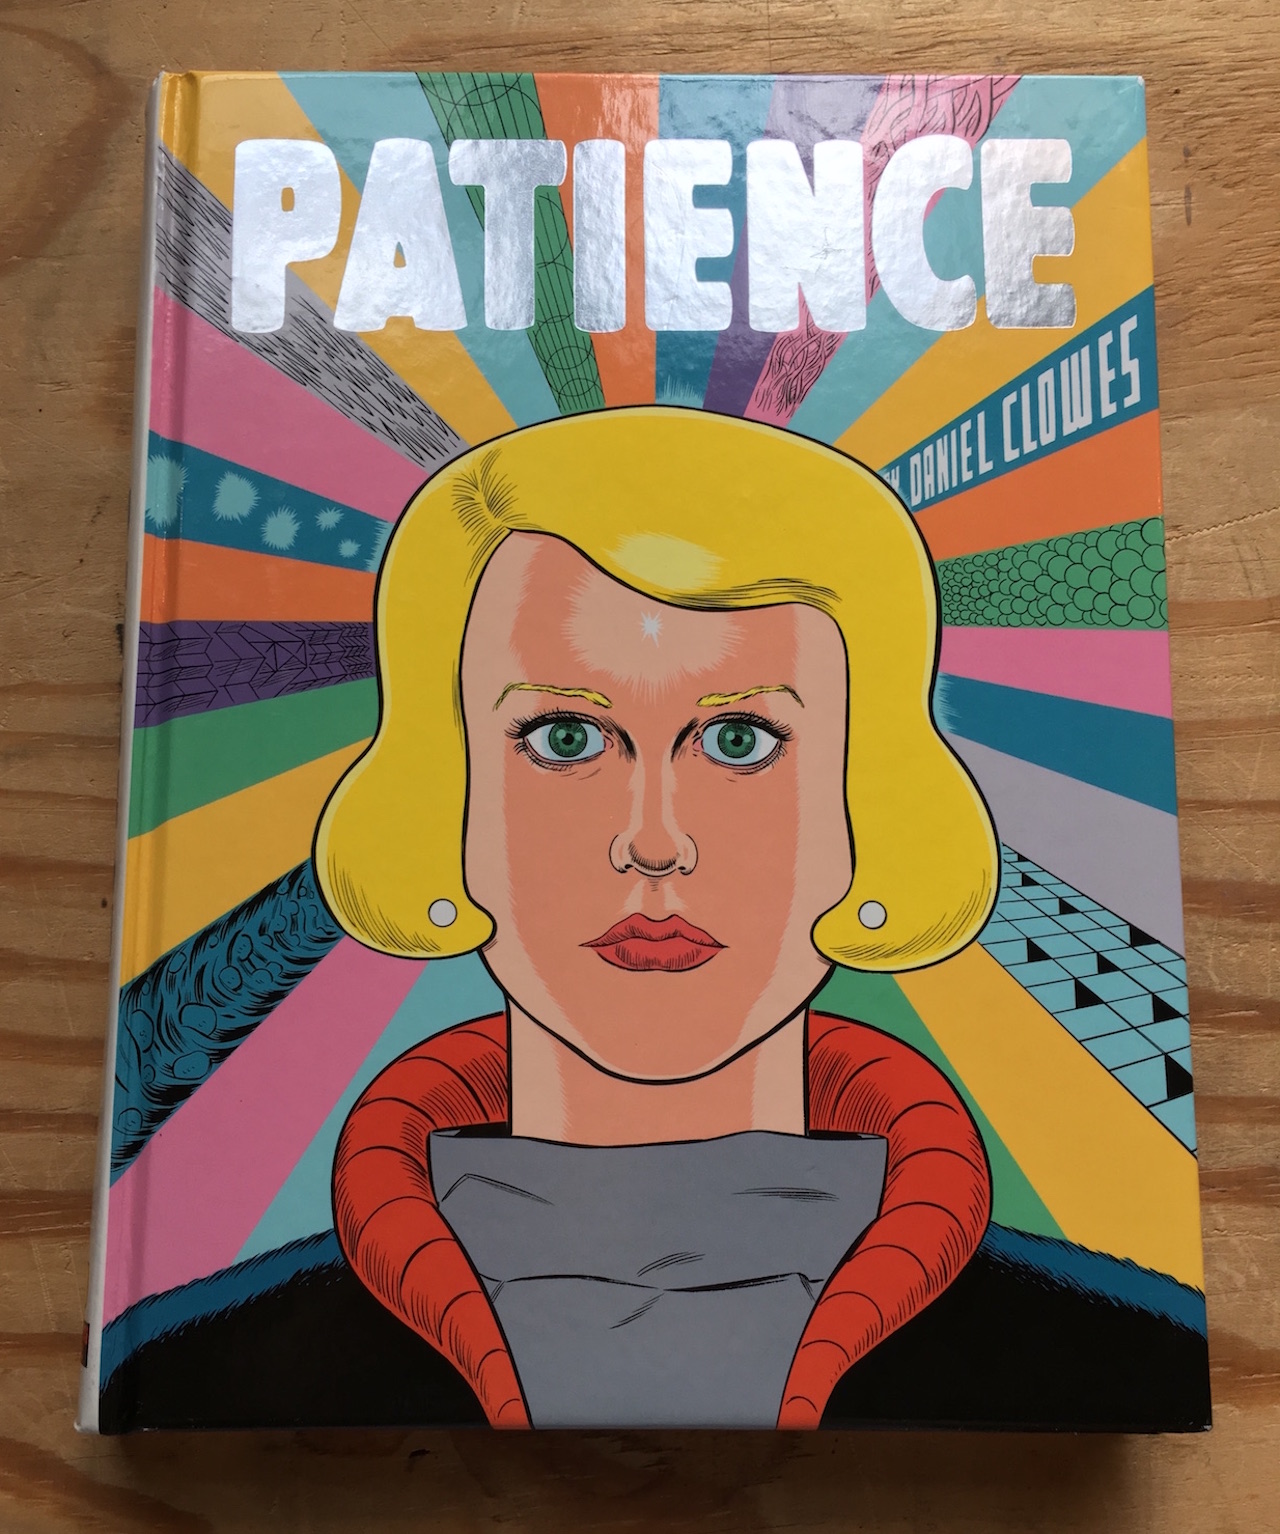 Cover of 'Patience' by Daniel Clowes, published by Fantagraphics Books (2016) (all photos by the author for Hyperallergic)